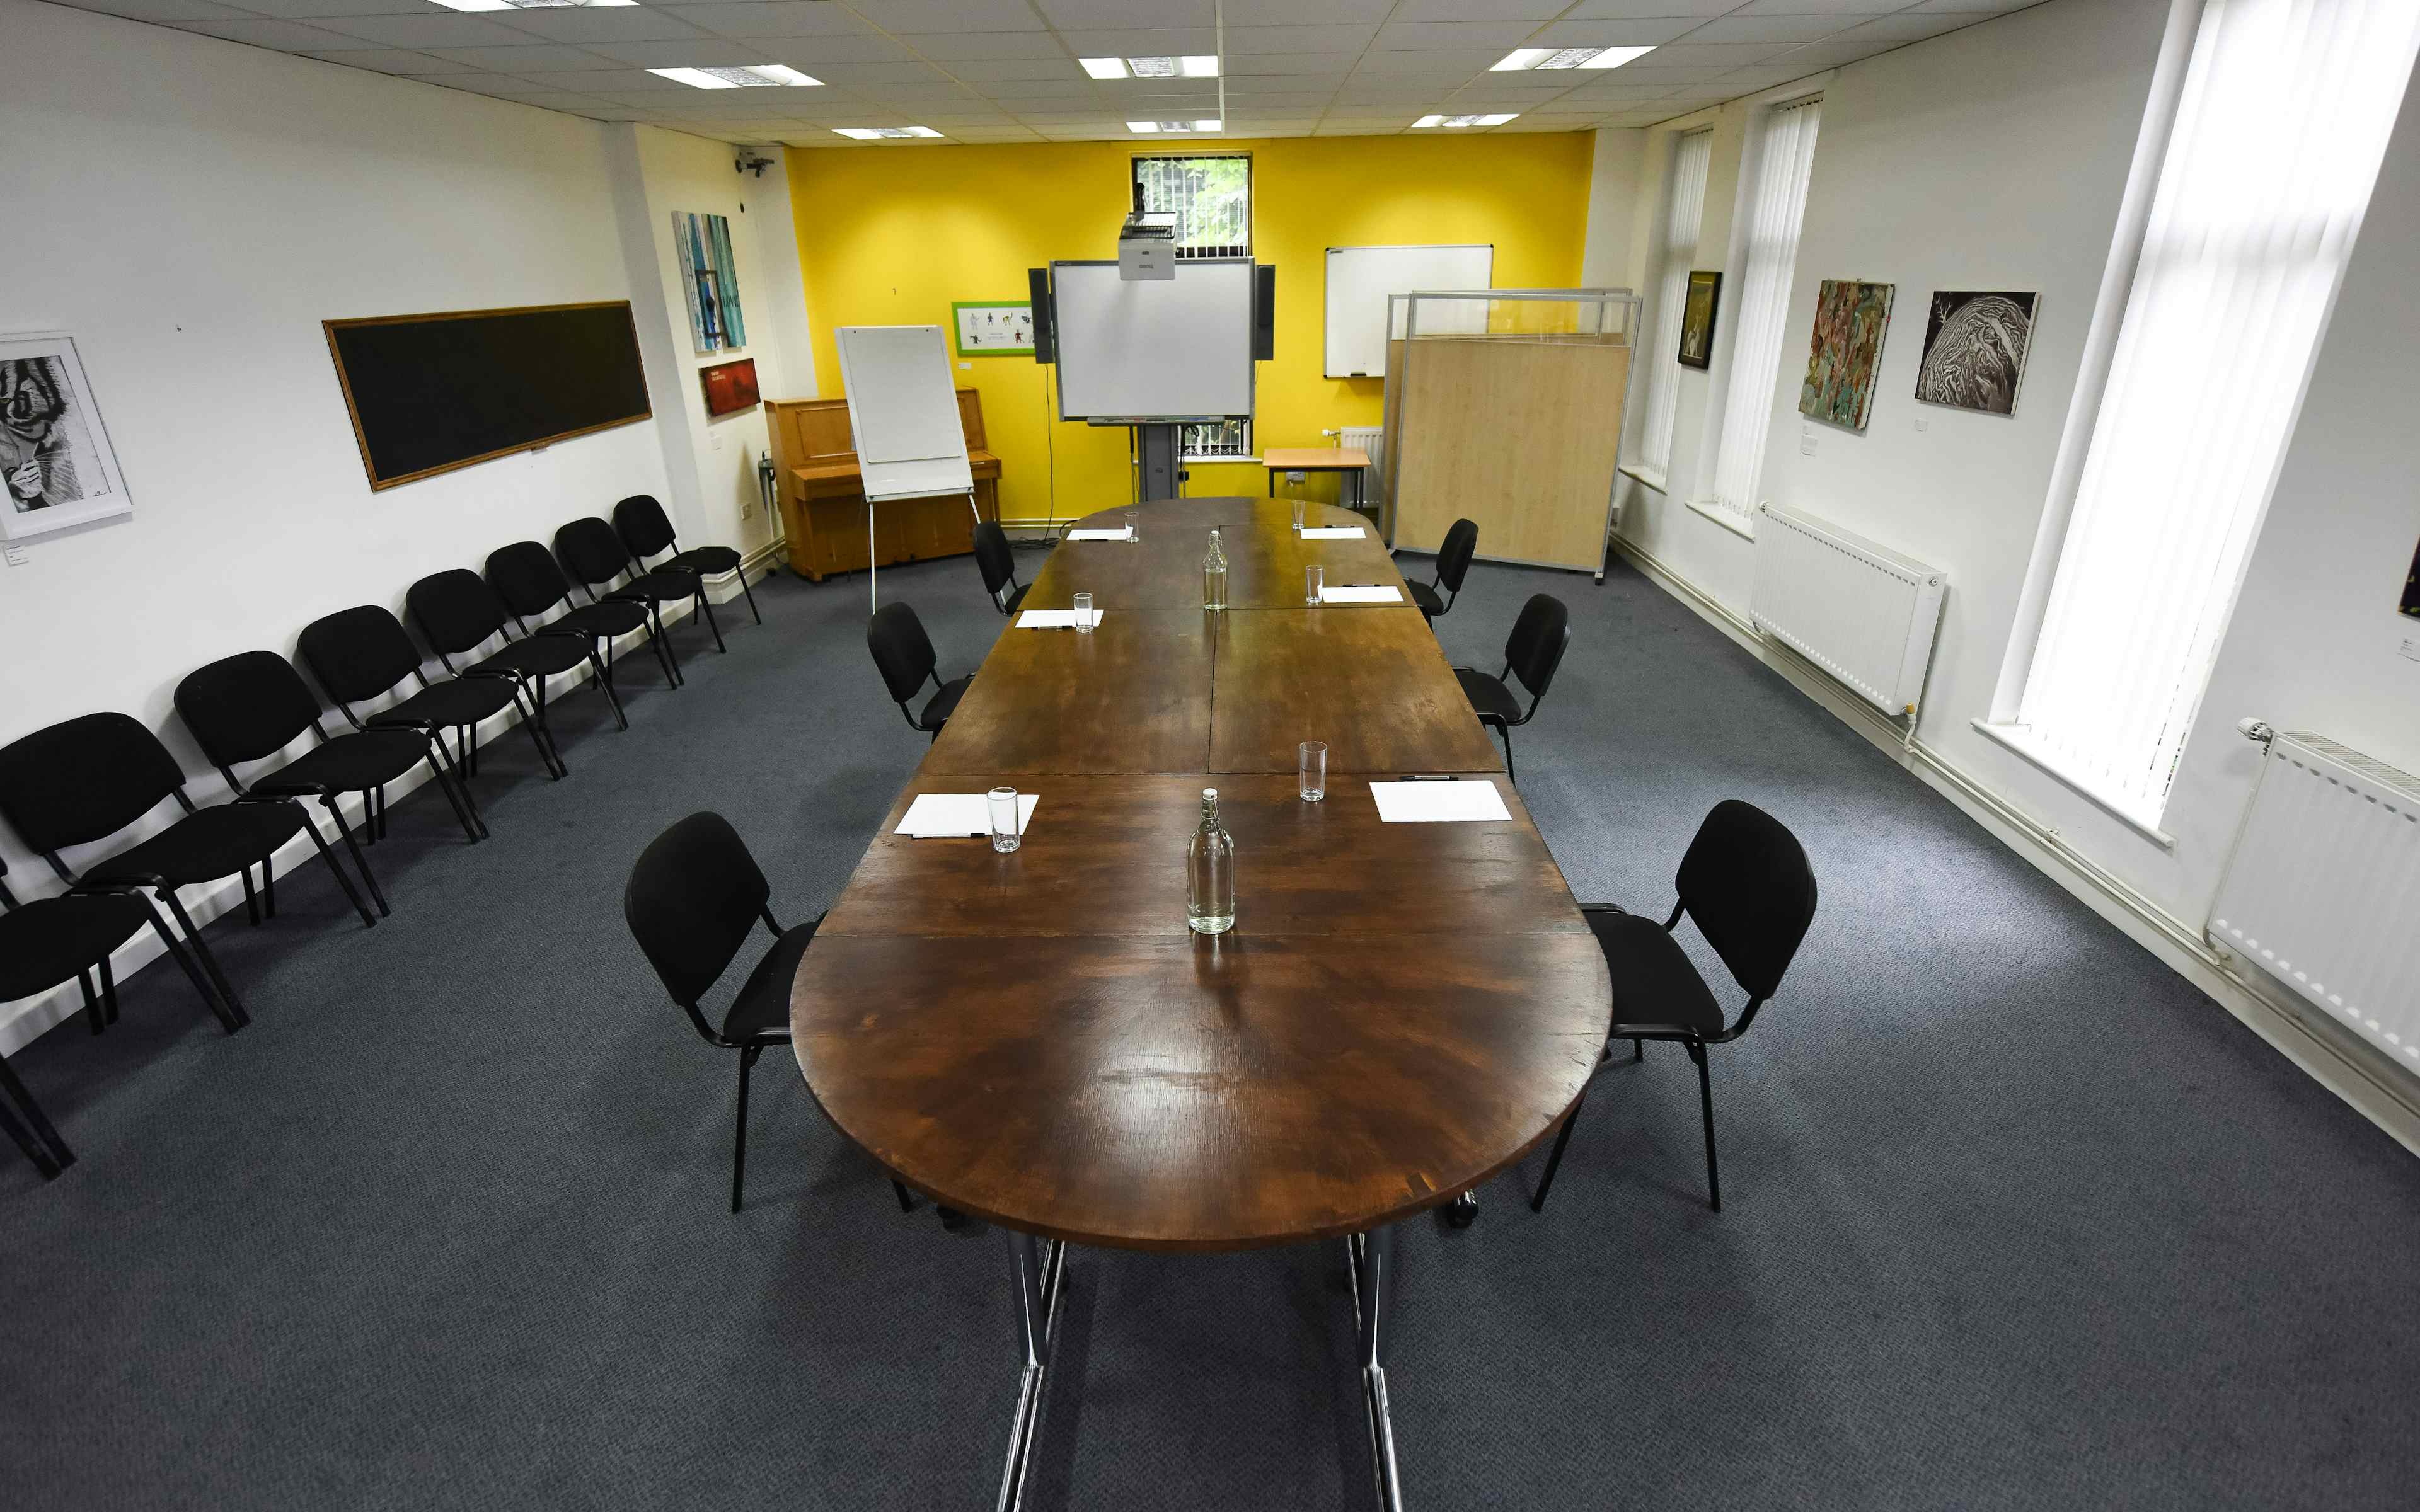 The Meeting Room - image